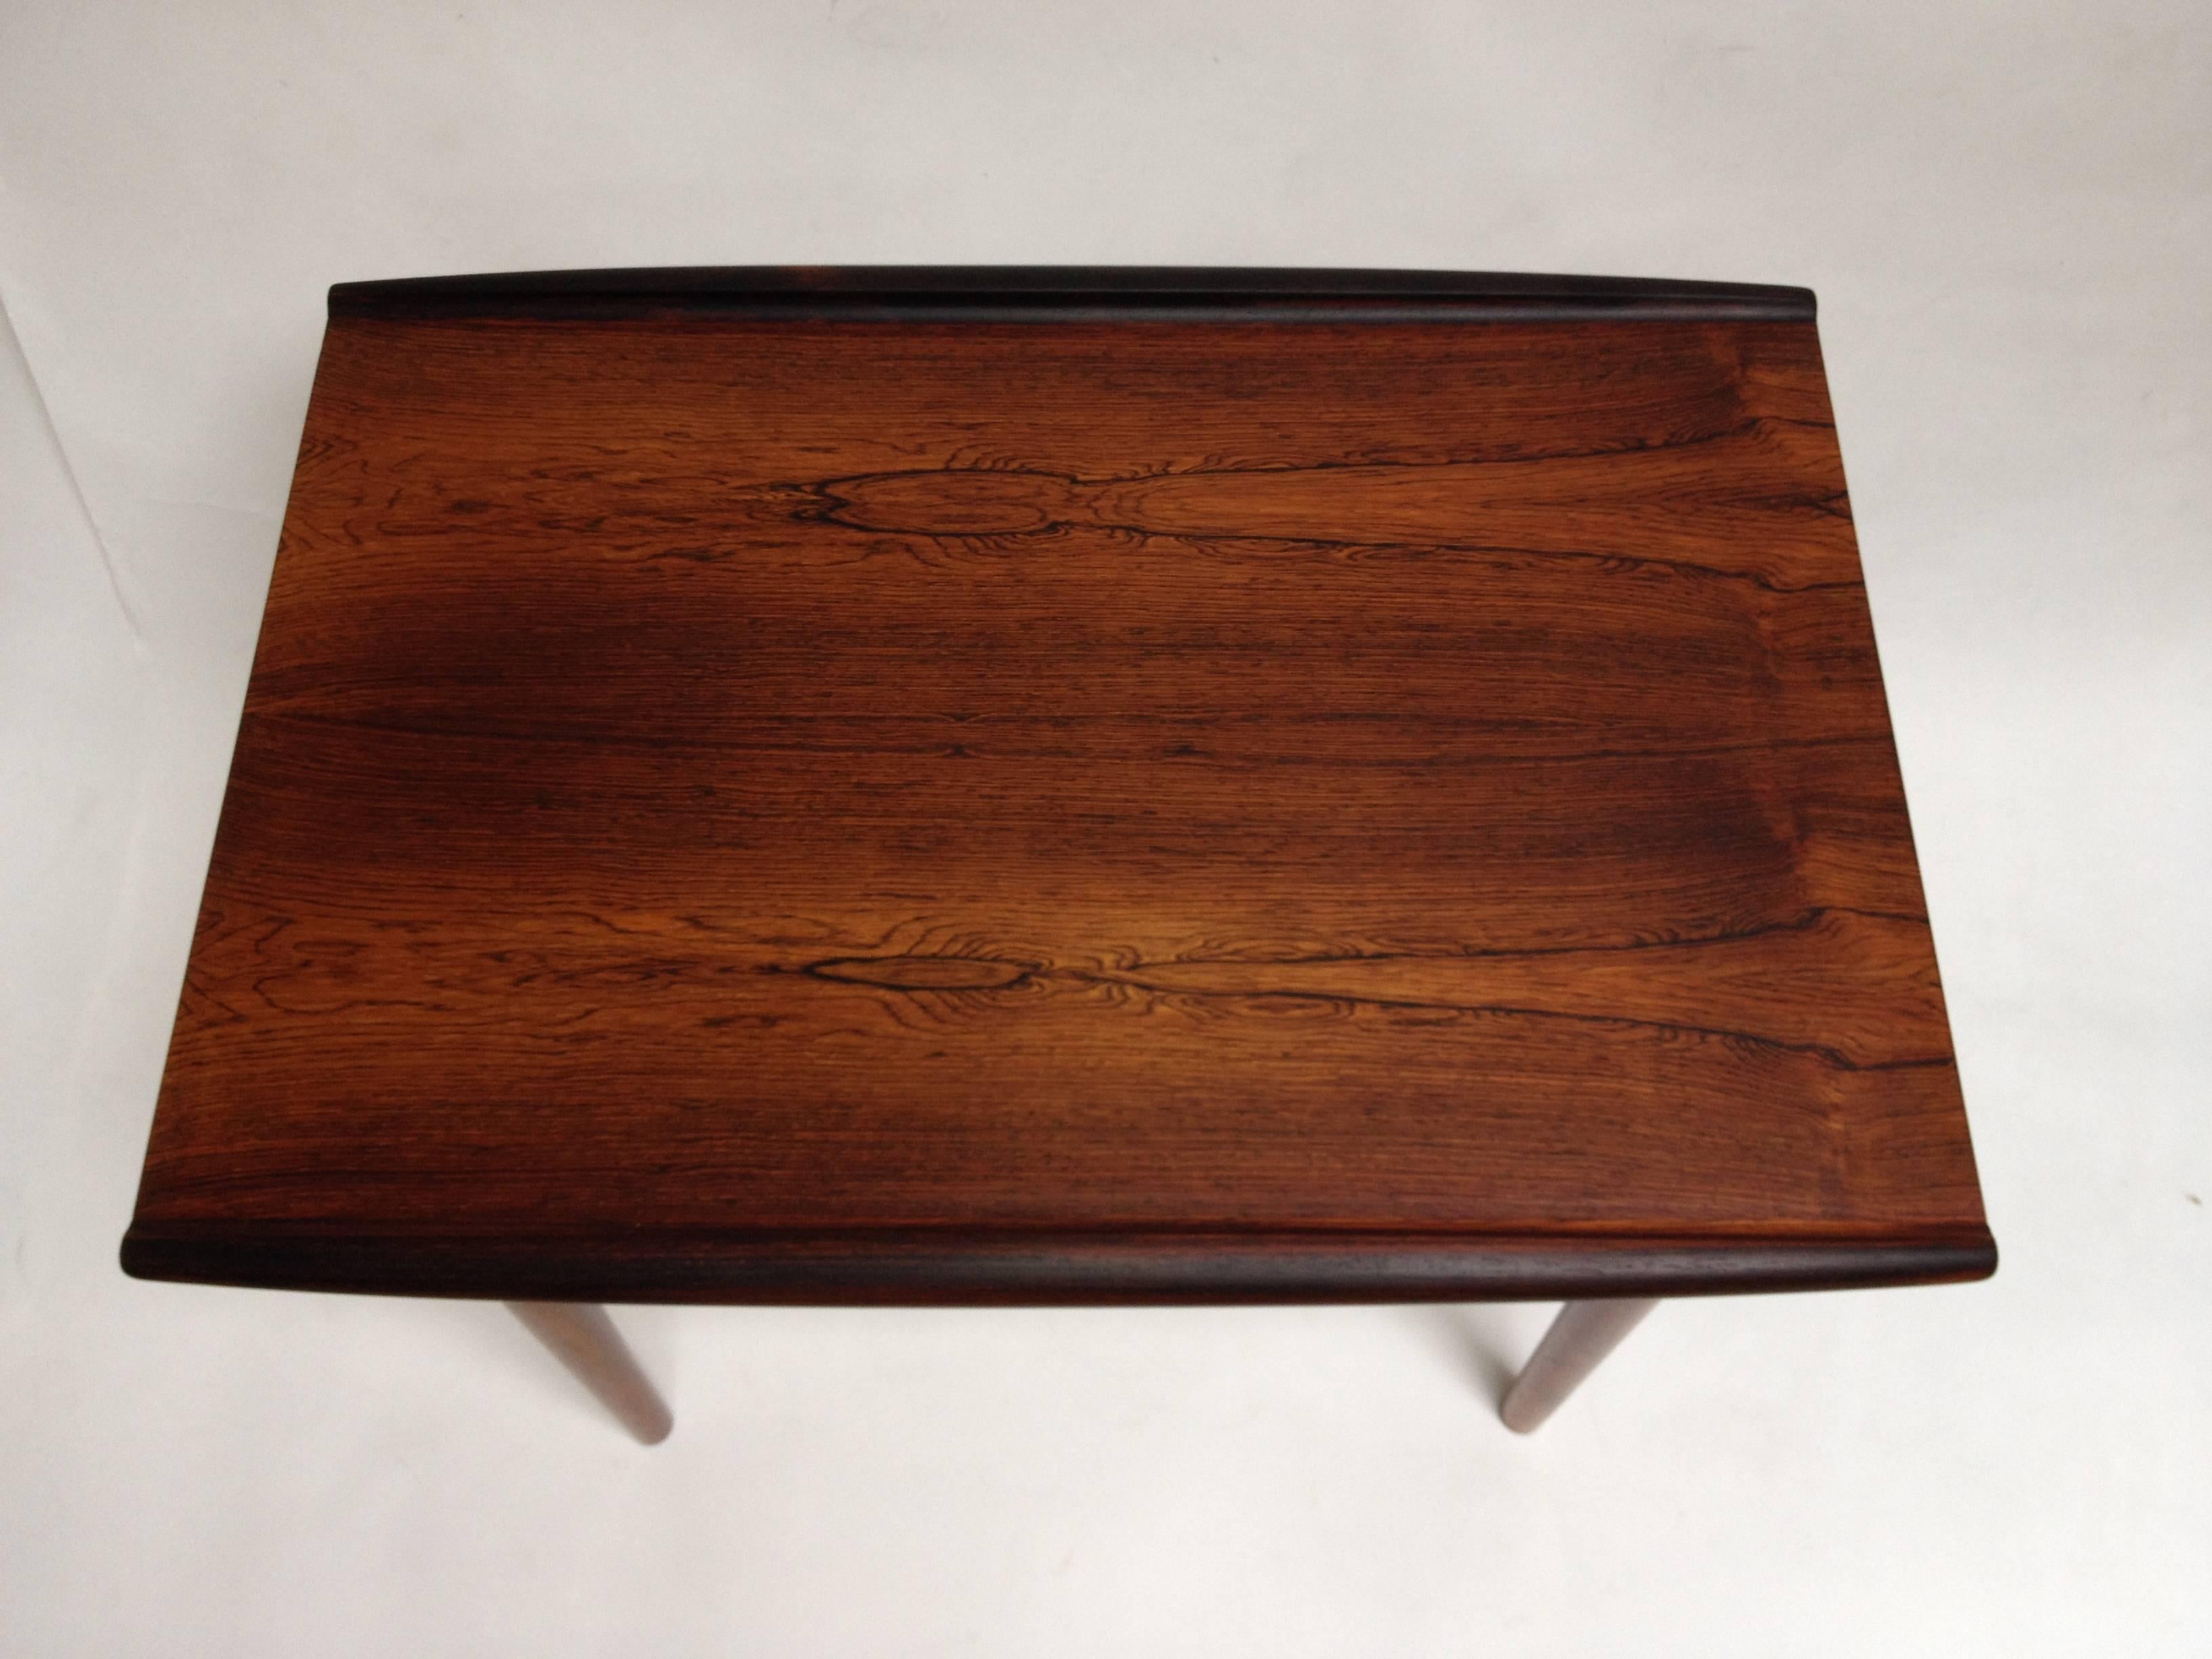 Stunning 1960's Rosewood Occasional/End table designed by Grete Jalk for Glostrup - Made in Denmark - amazing grain pattern throughout. Maker's label still intact -you can also see Grete Jalk's signature brass fastener detail. this beauty is in very